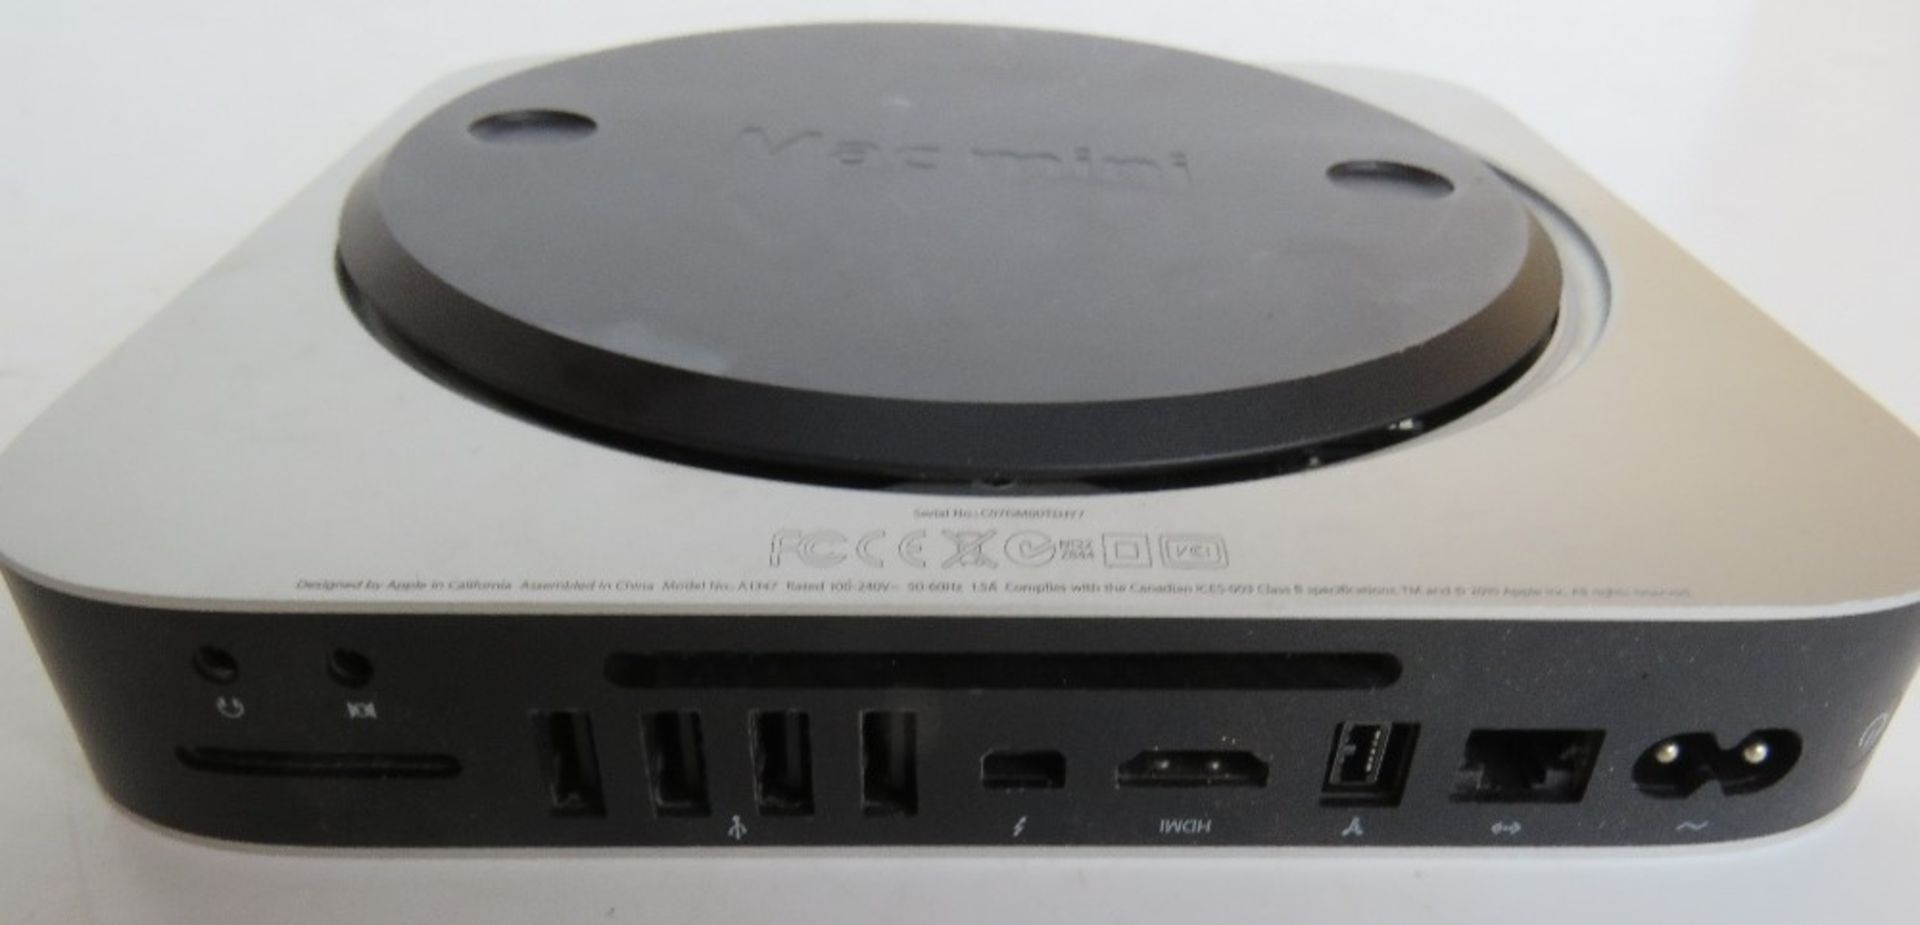 An Apple Mac Mini. No cables. - Image 3 of 3